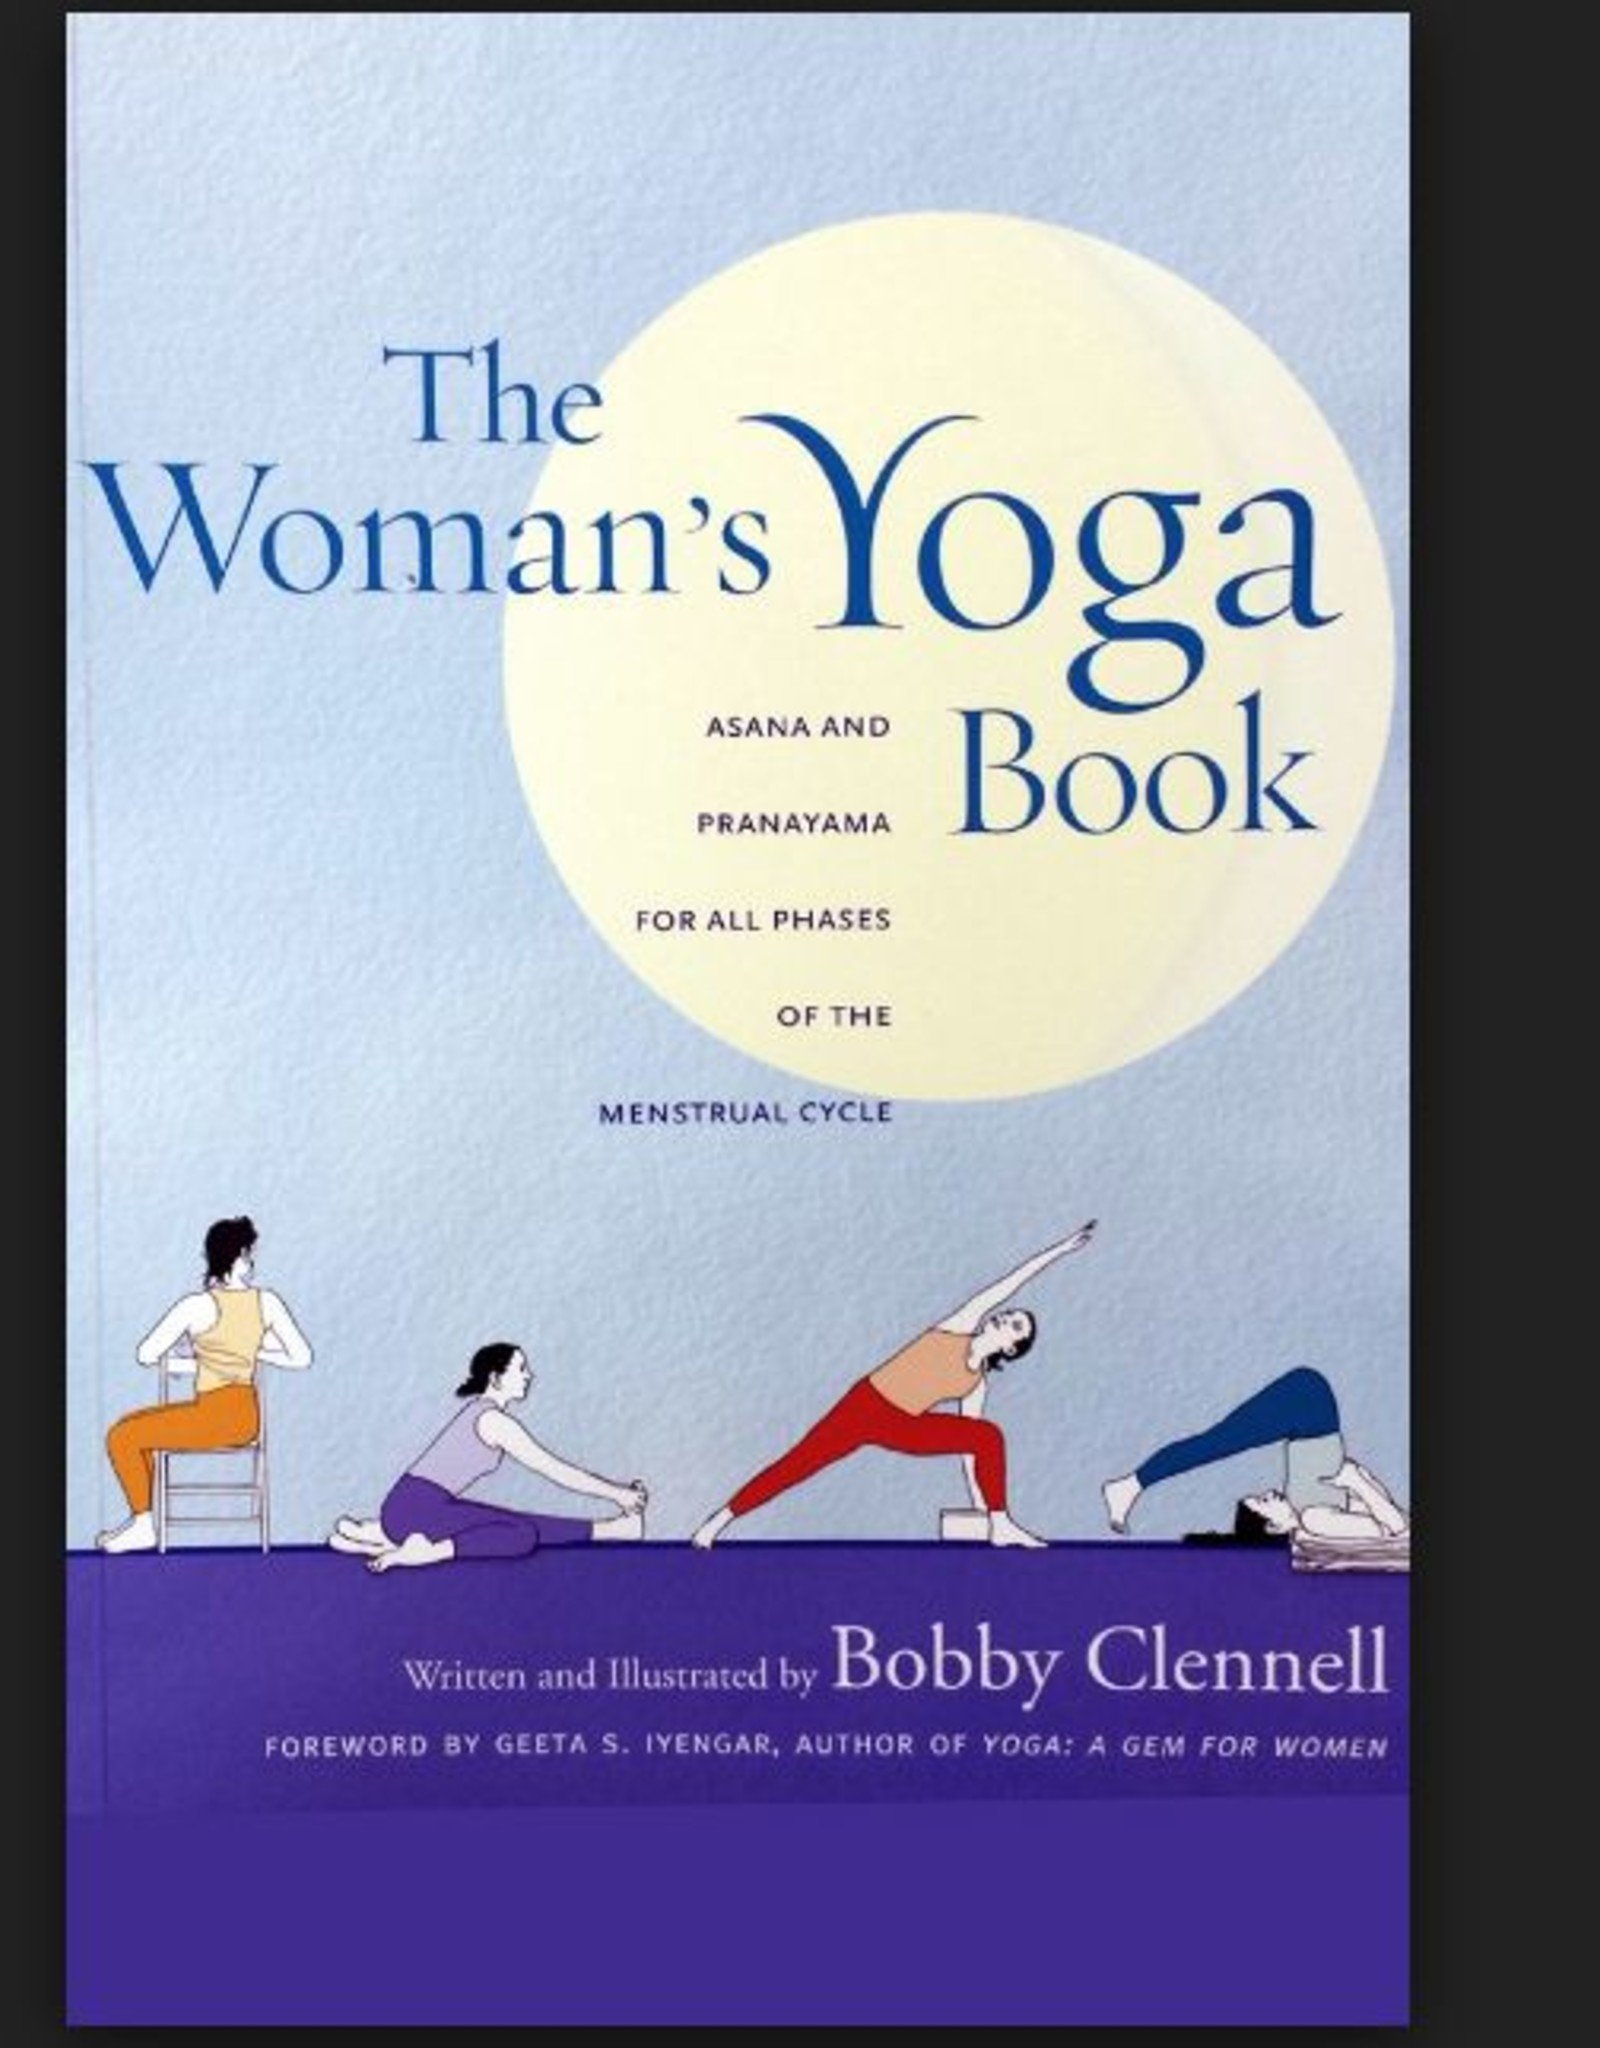 Ingram The Woman's Yoga Book: Asana and Pranayama for all Phases of the Menstrual Cycle